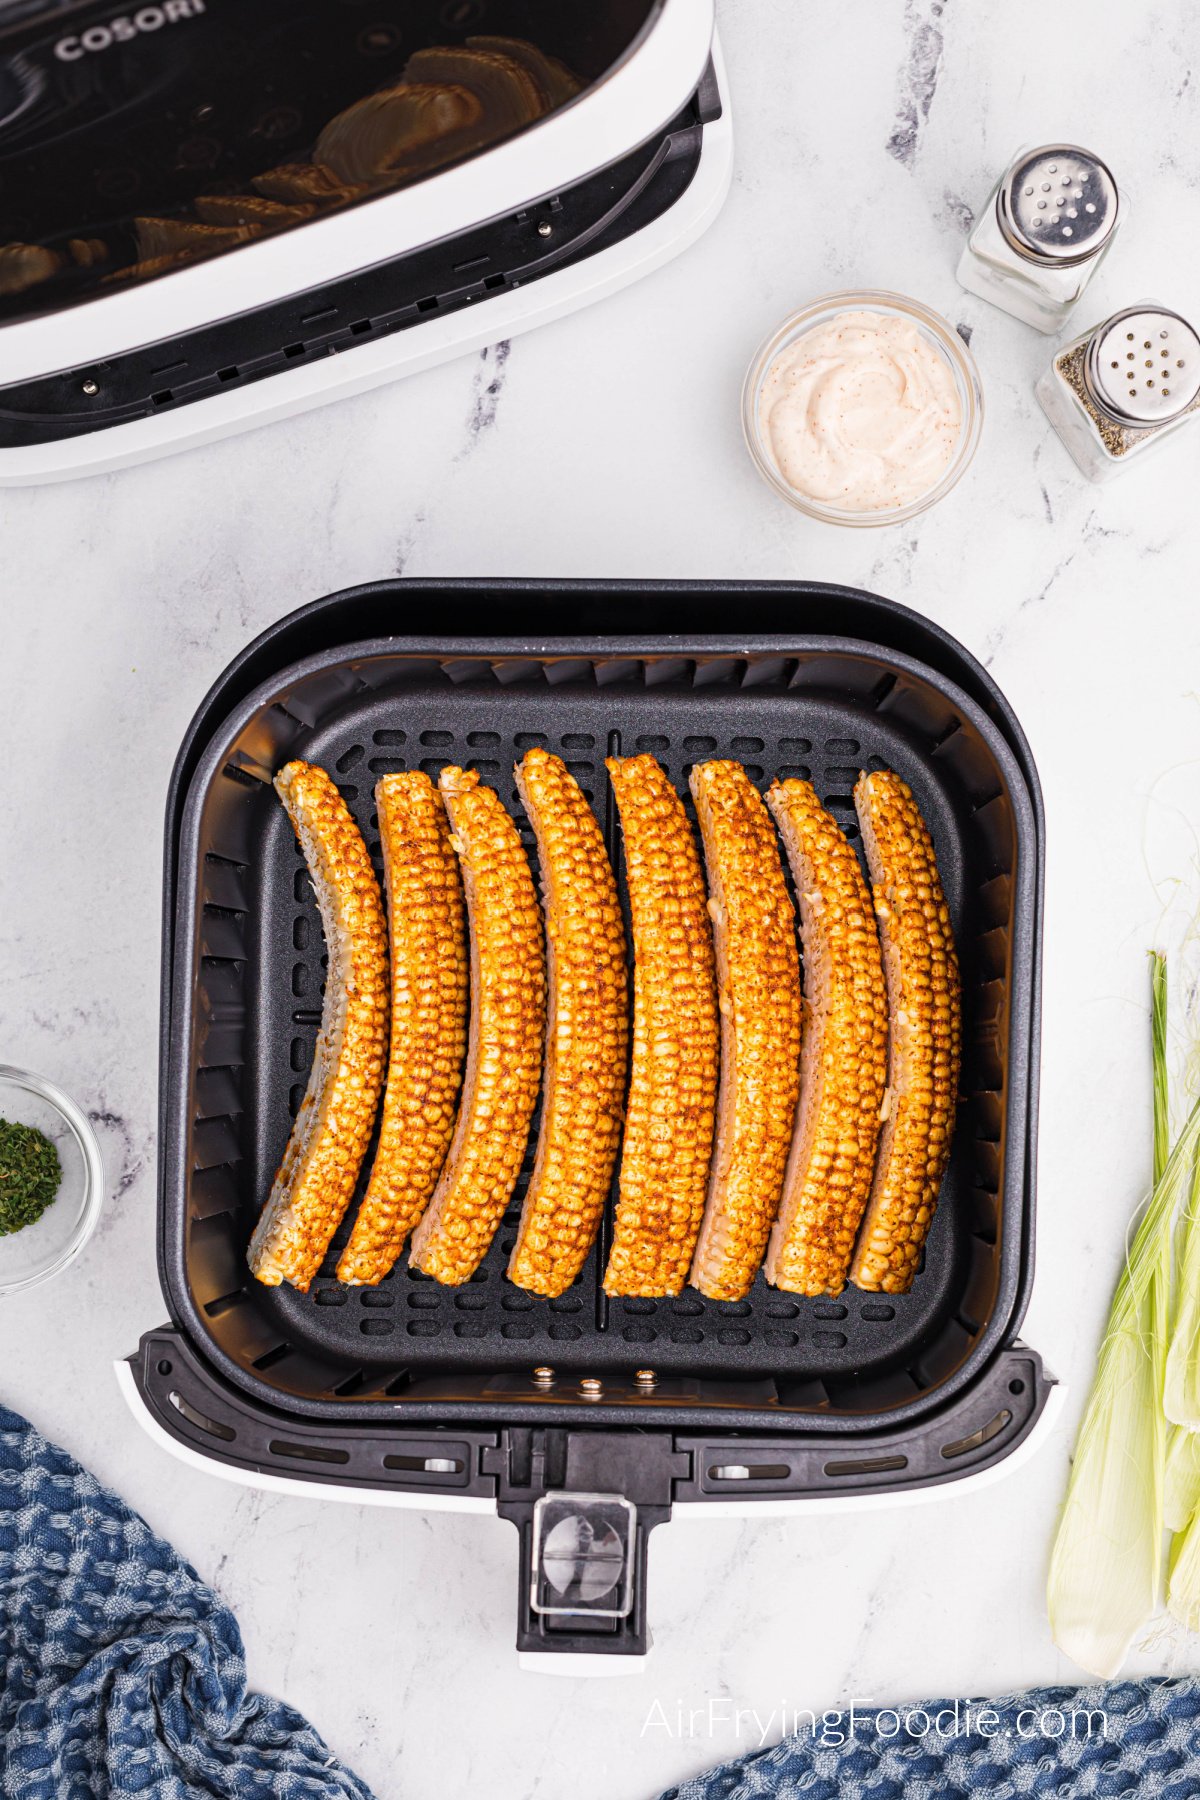 Corn ribs in the basket of the air fryer ready to cook.